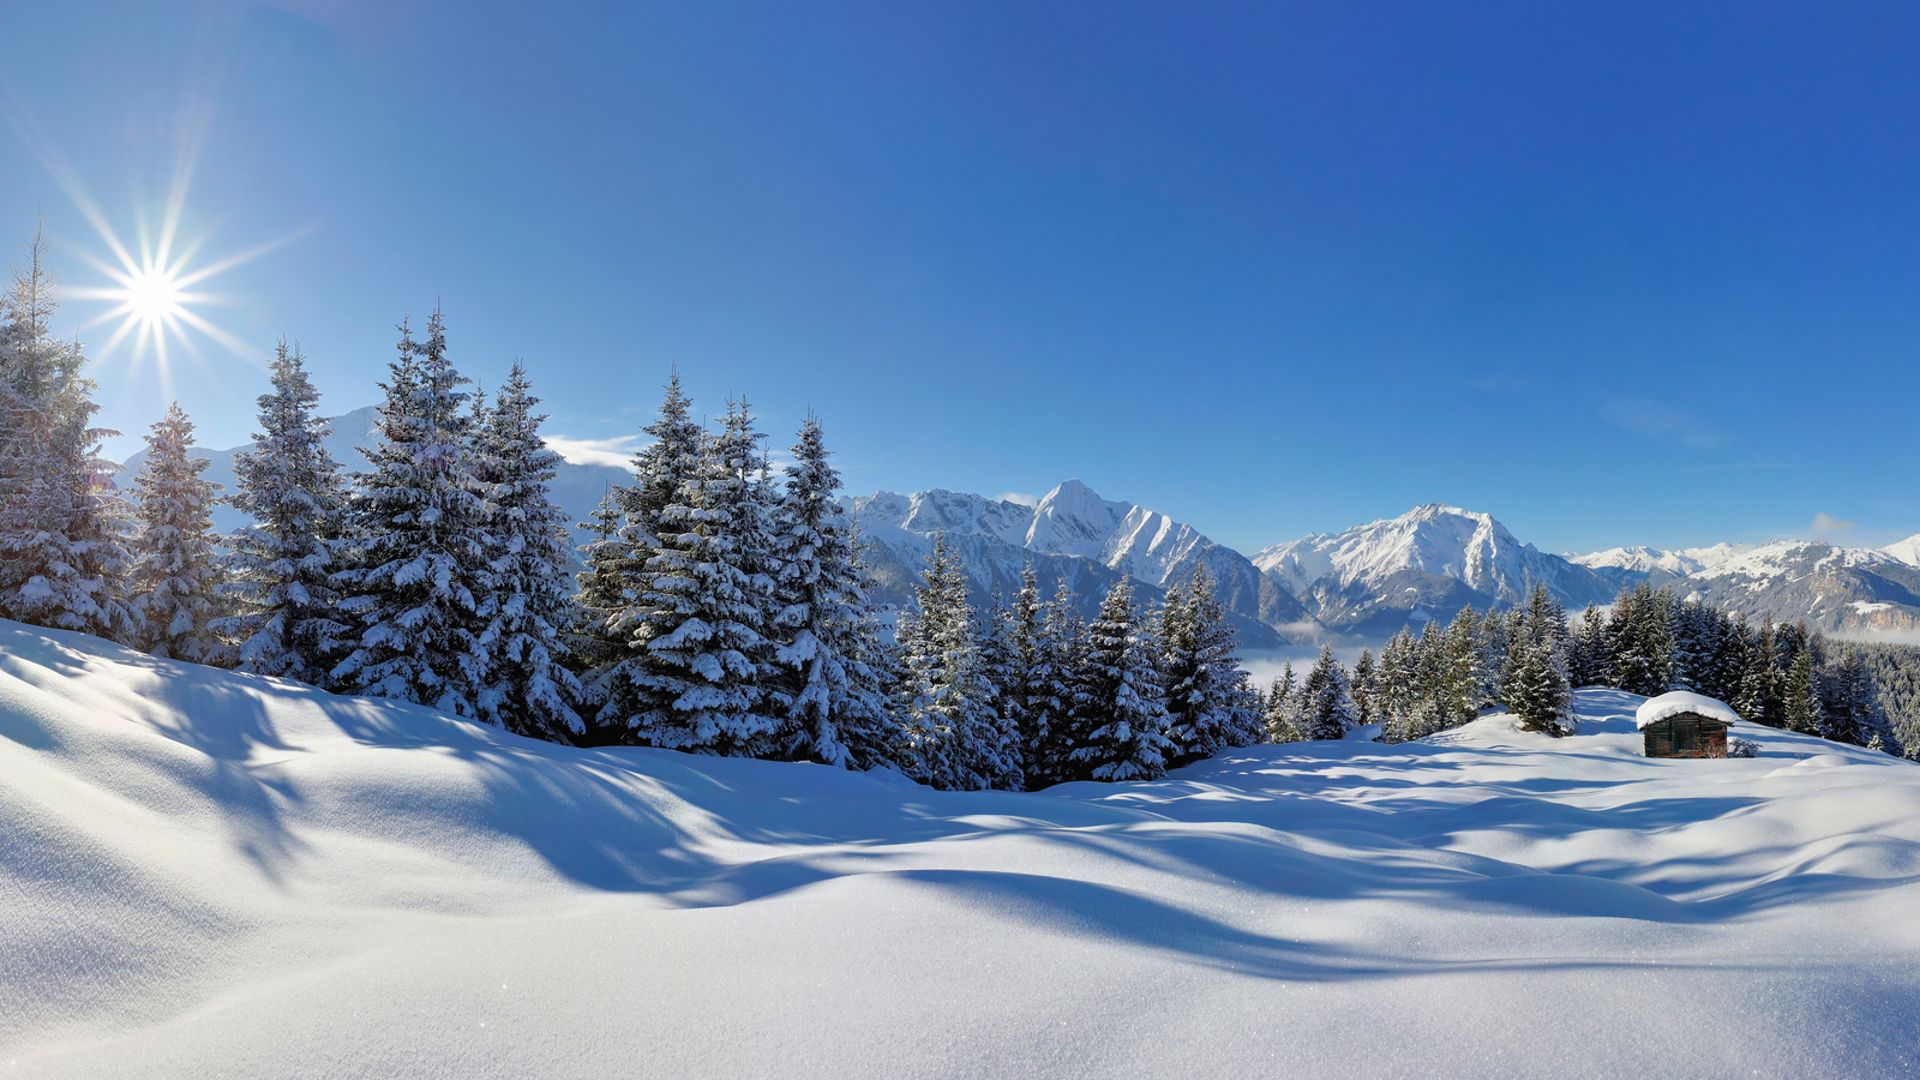 Enjoy the snow-covered winter landscape in Zillertal